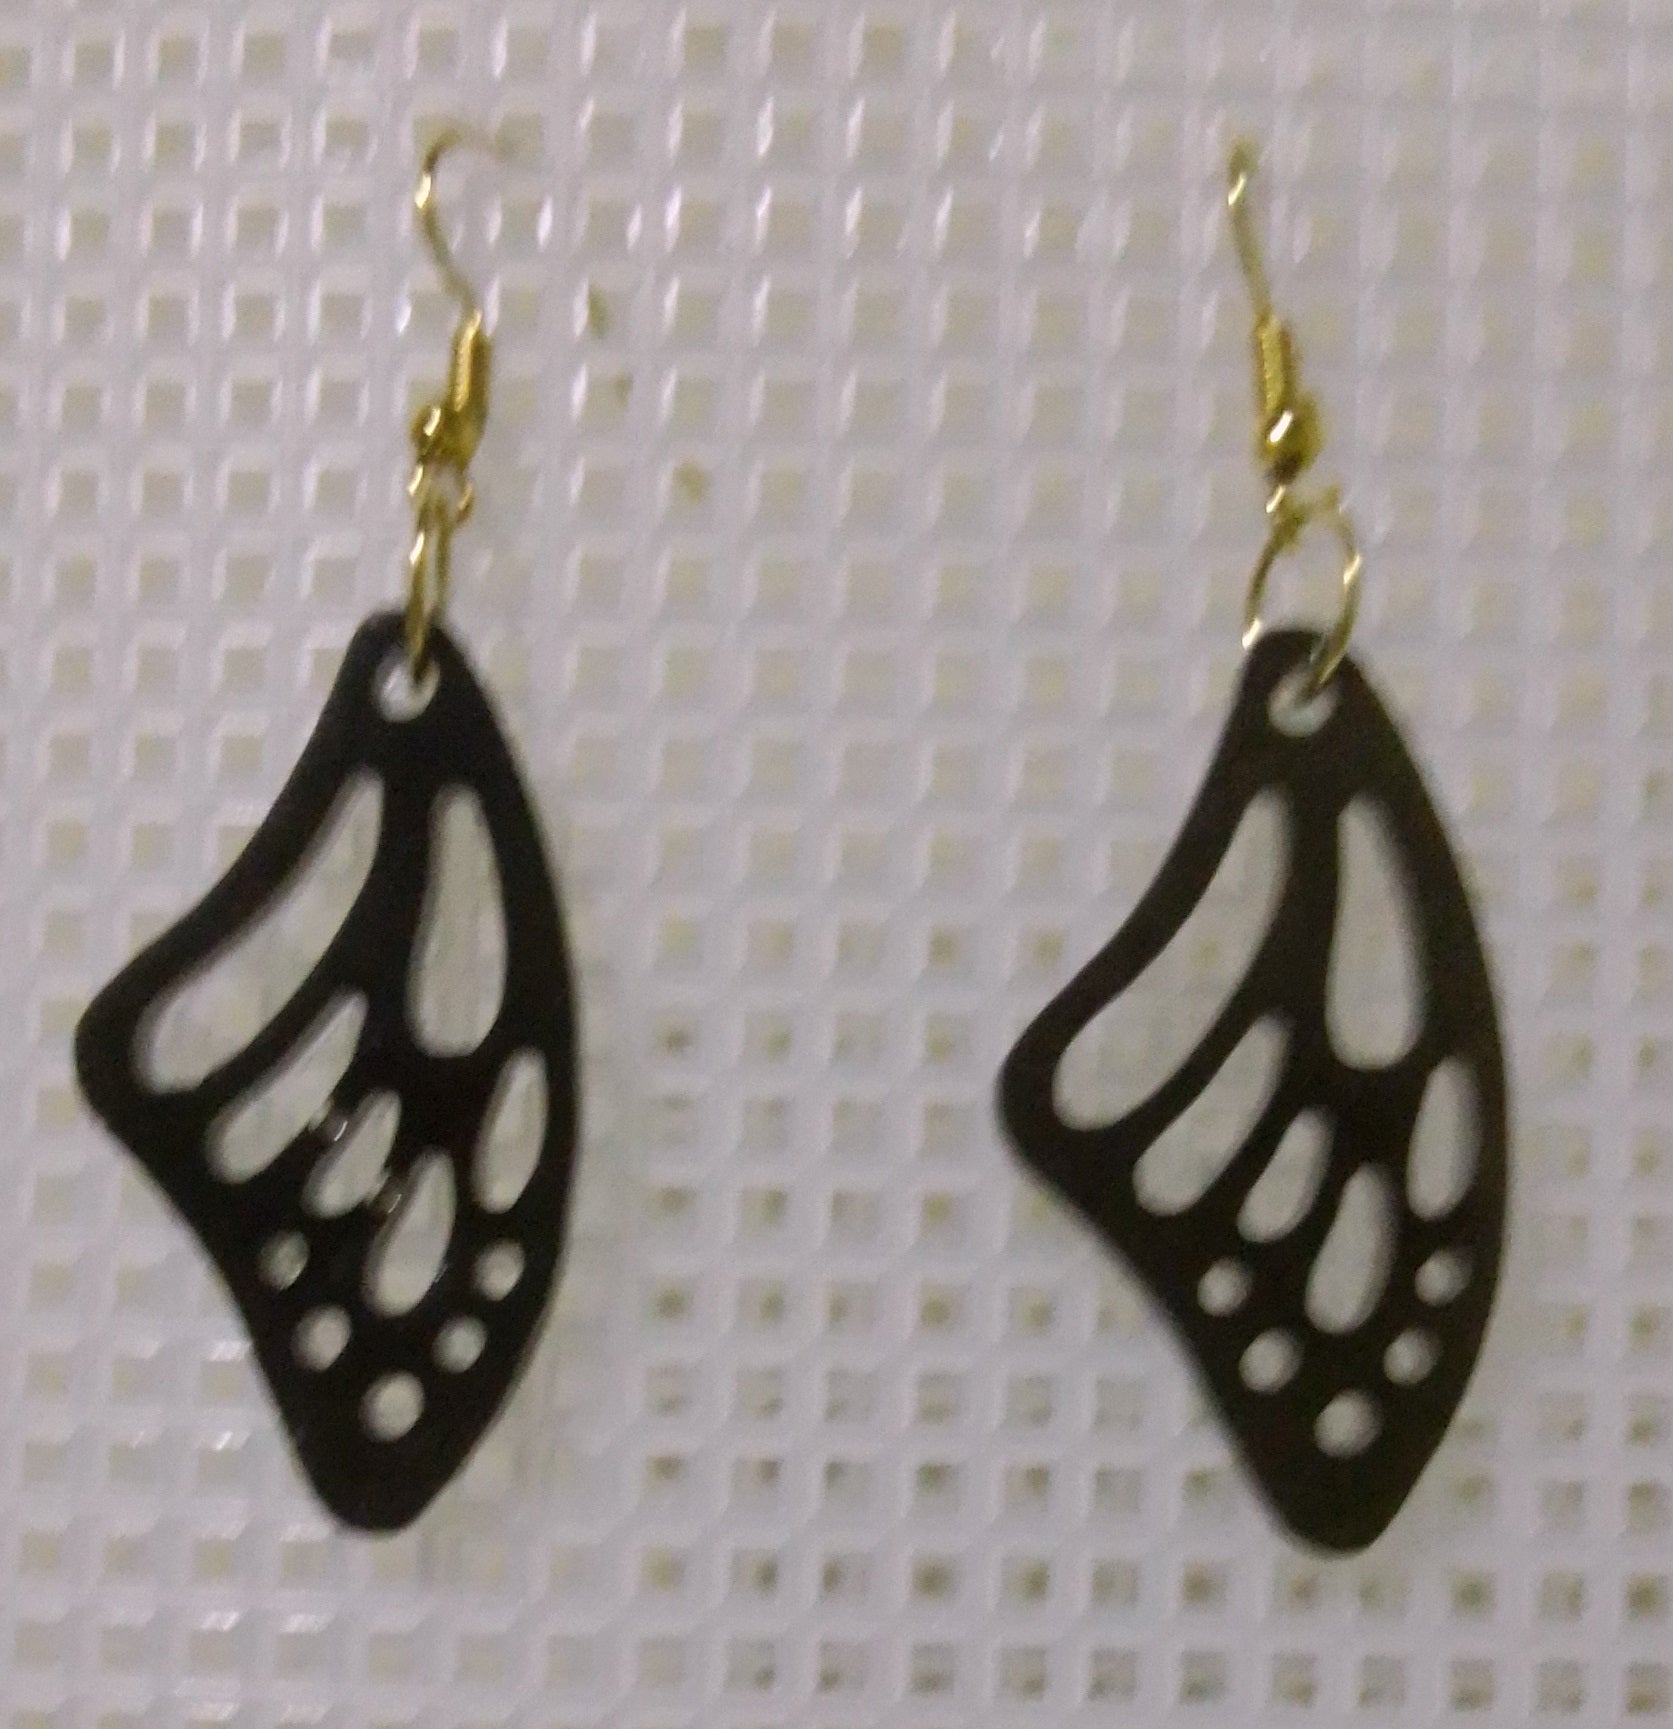 volcanic ash and epoxy resin earrings shaped like a butterfly wing